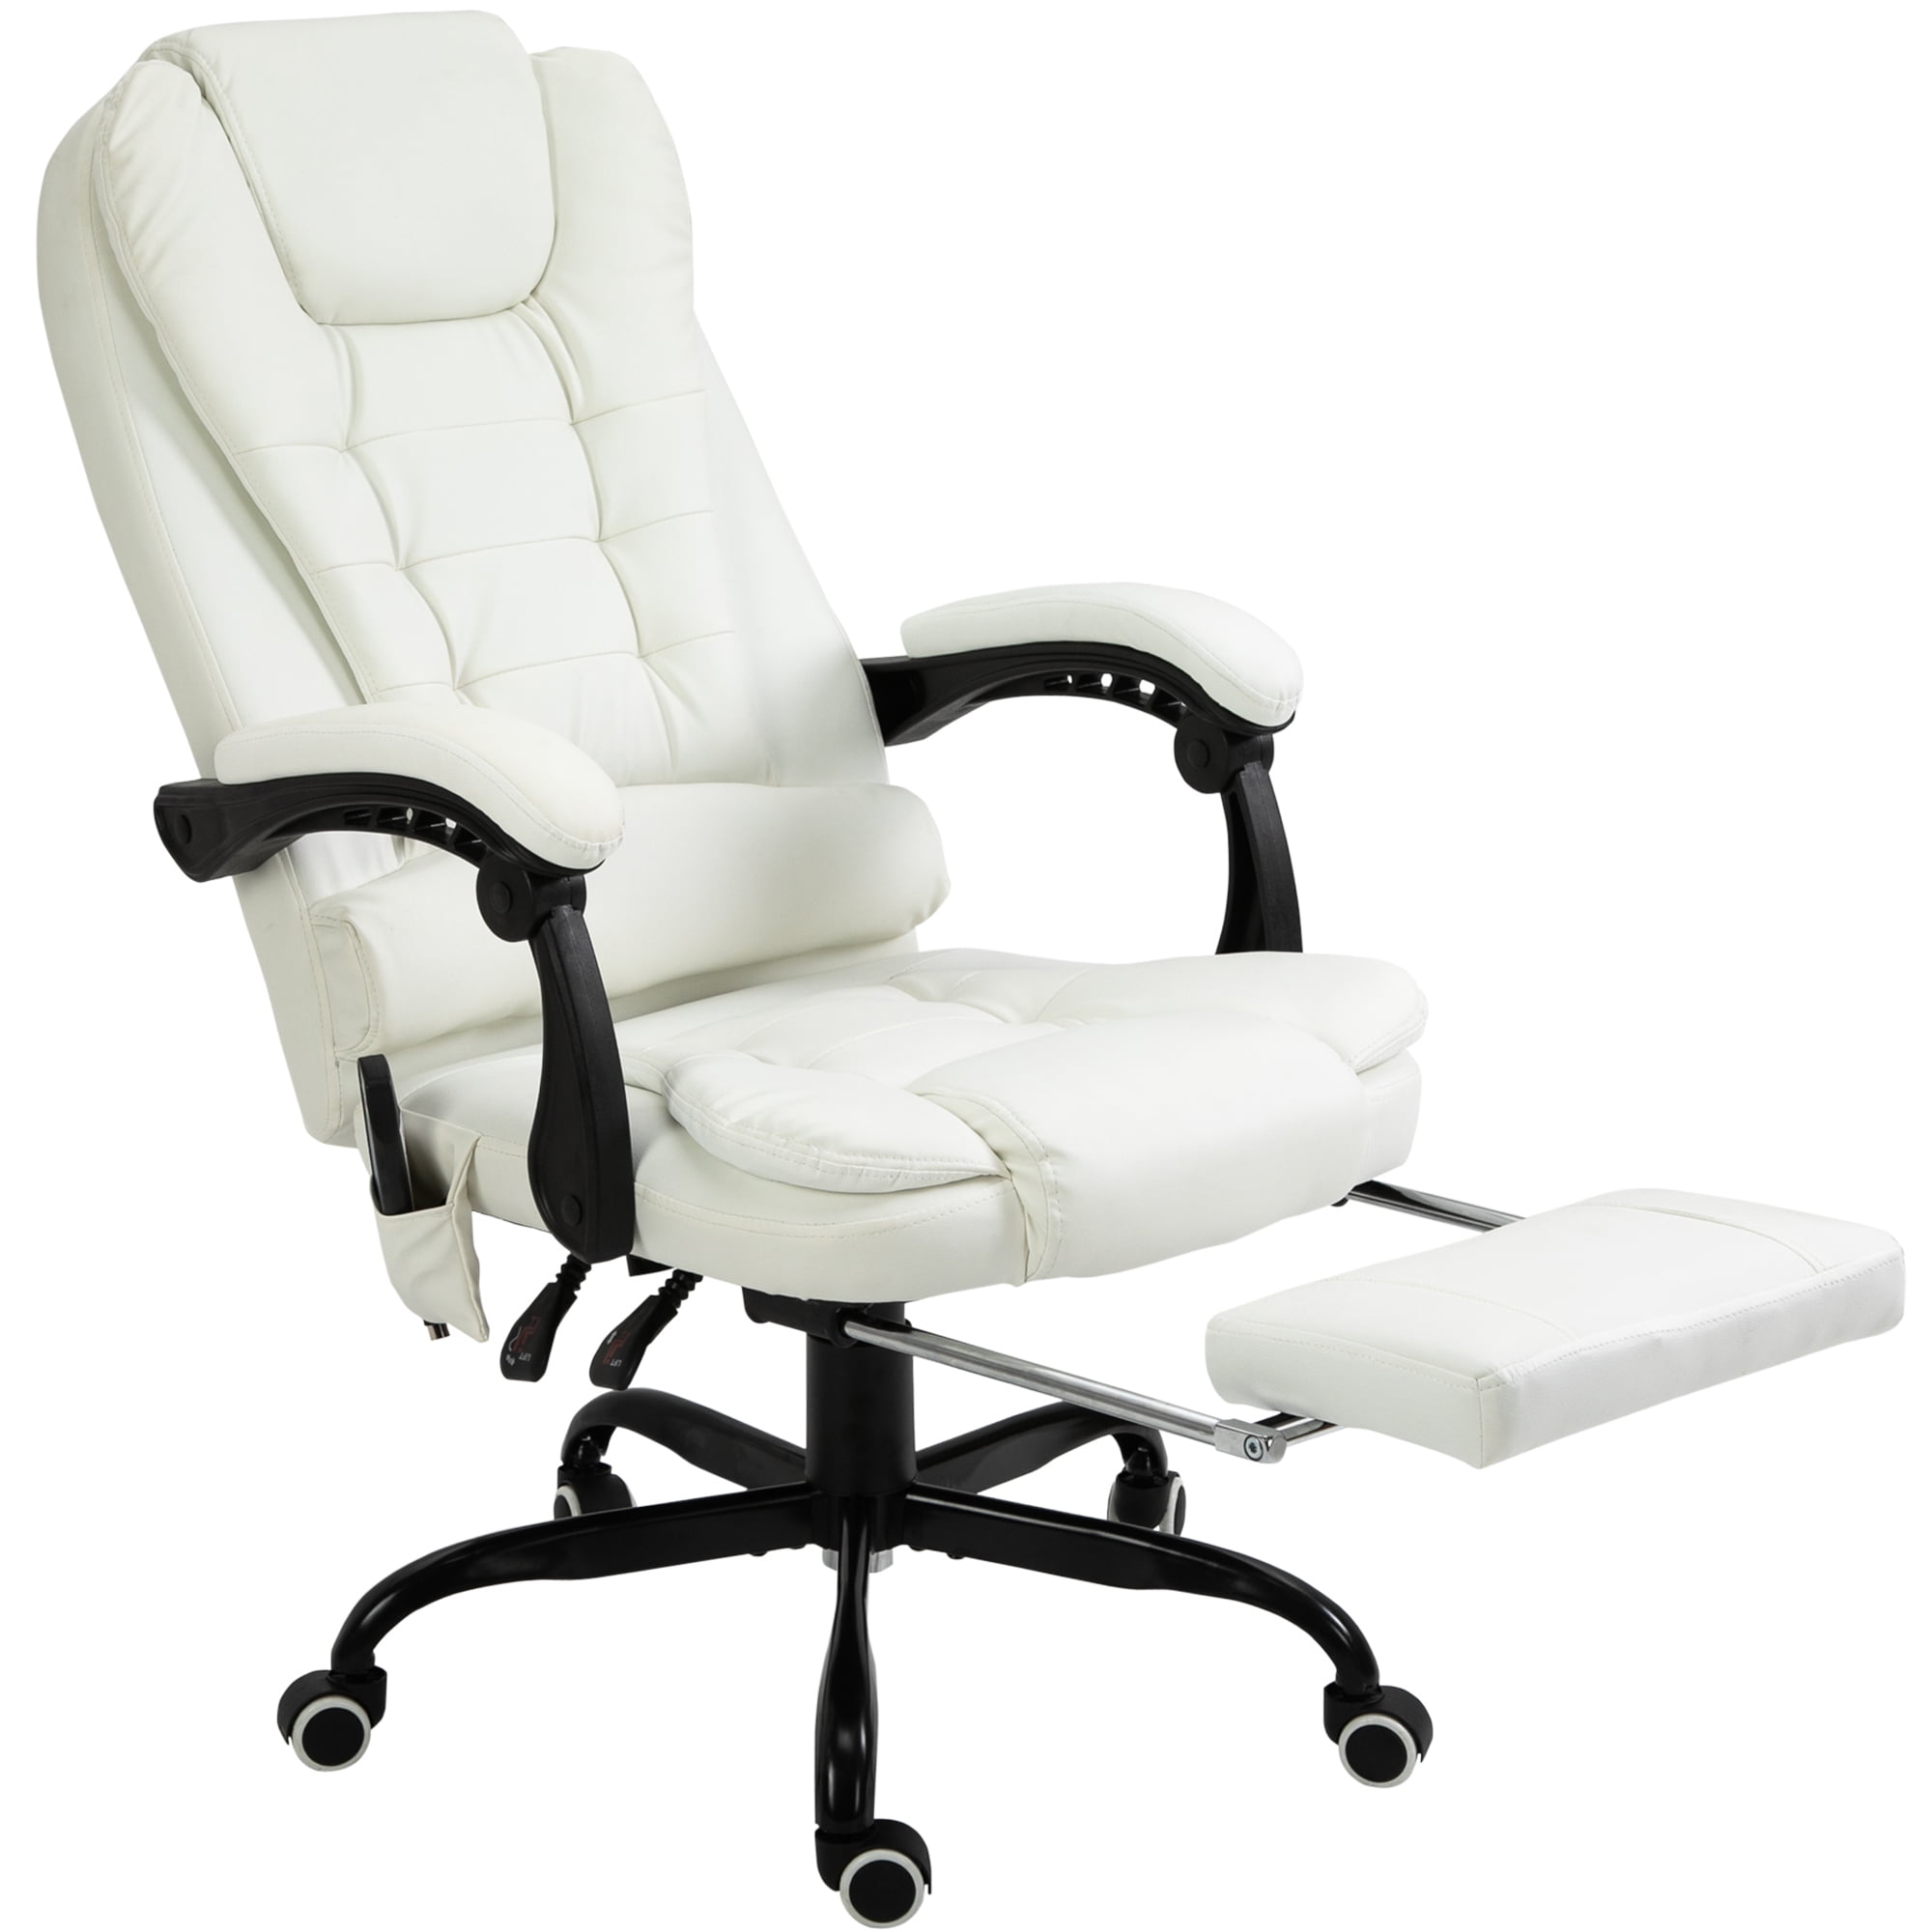 Vinsetto High Back Vibrating Massage Office Chair with 7